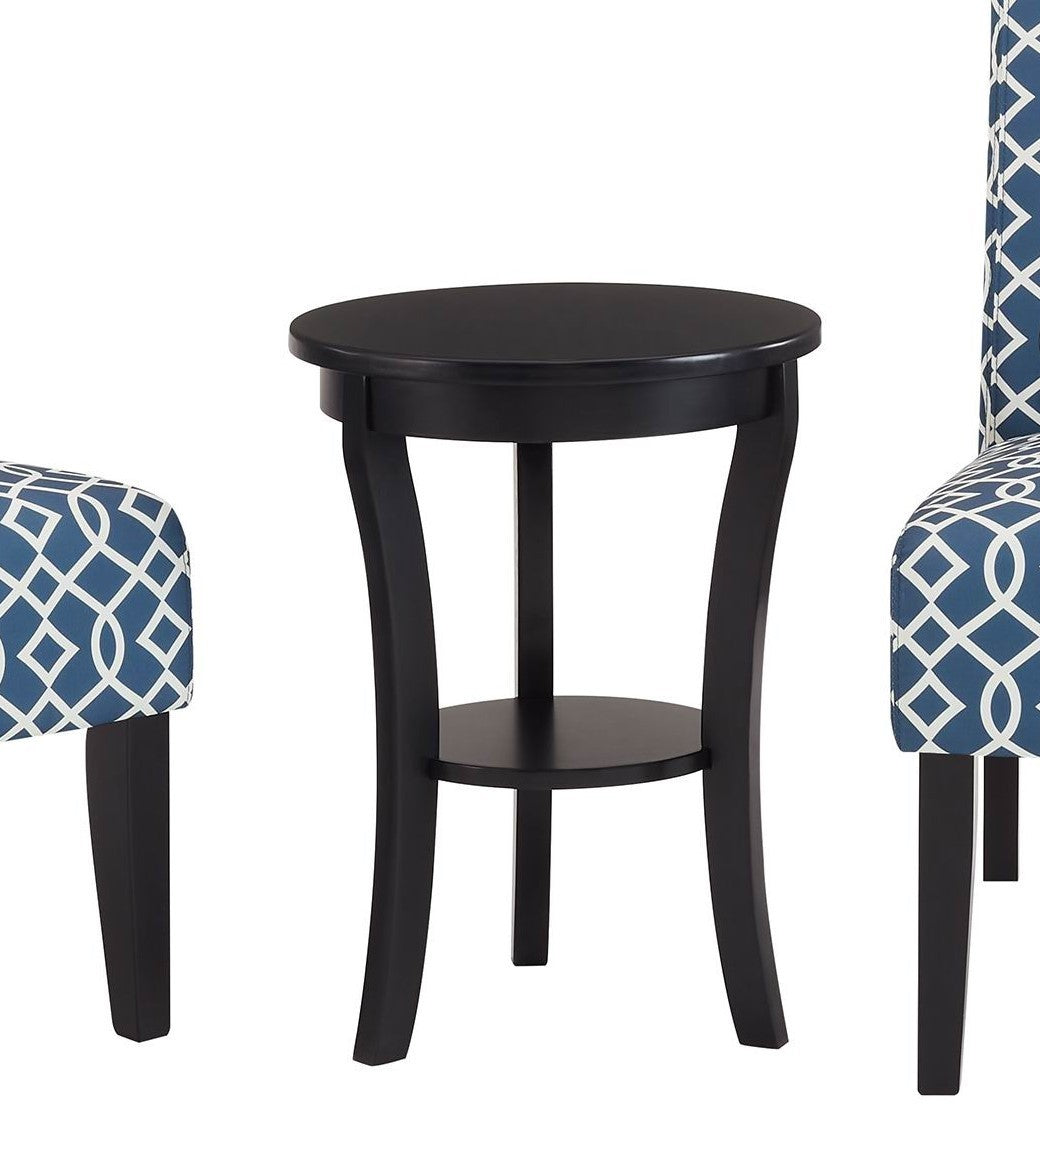 Modern Style 3pc Set Living Room Furniture 1 Side Table and 2 Chairs Blue Fabric Upholstery Wooden Legs